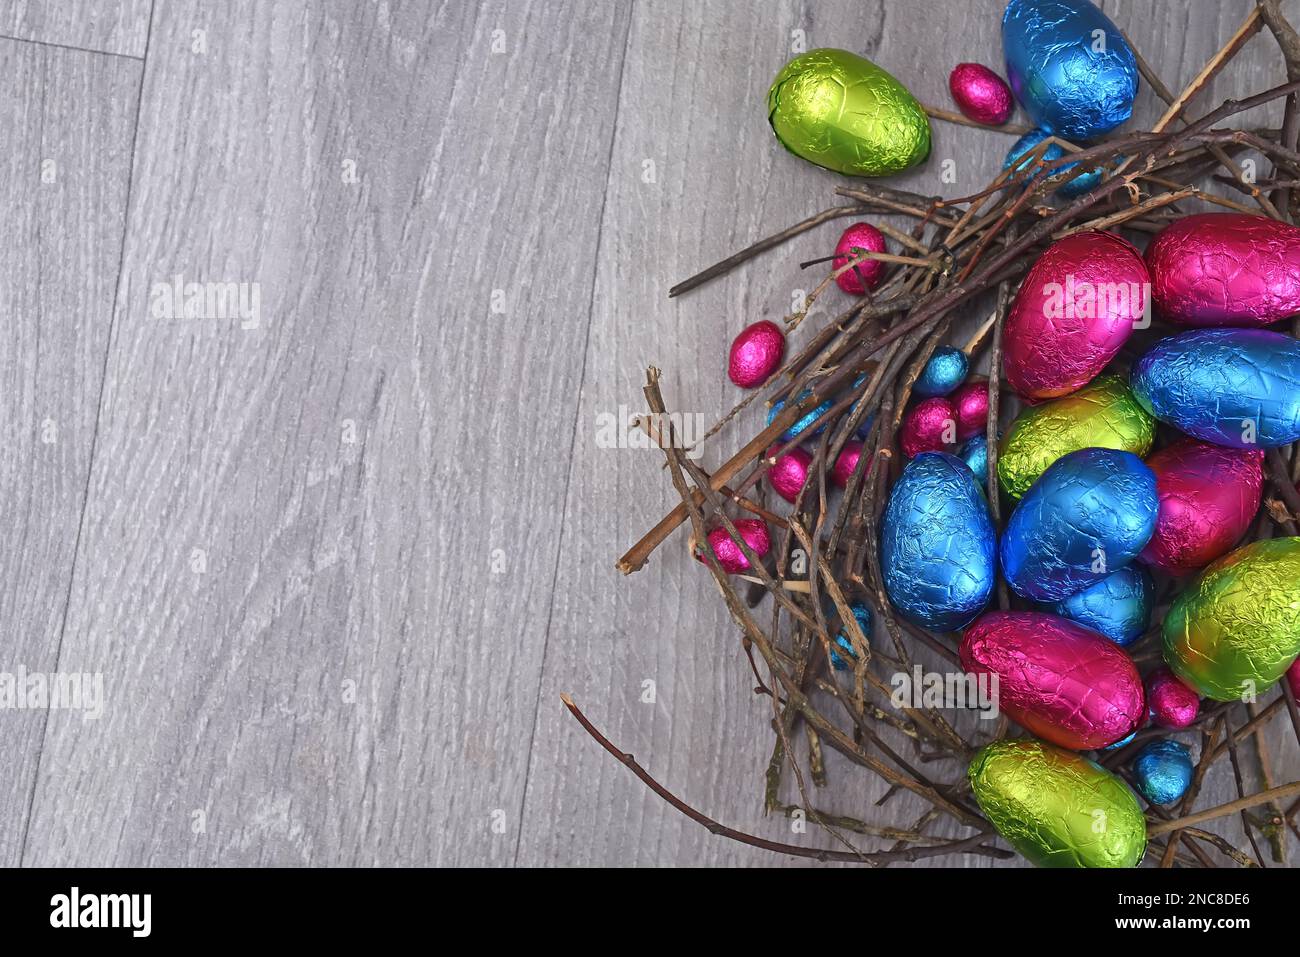 Foil wrapped multi coloured easter eggs in pink, green, blue and yelow in a natural nest made of sticks and twigs, against a grey wooden background. Stock Photo